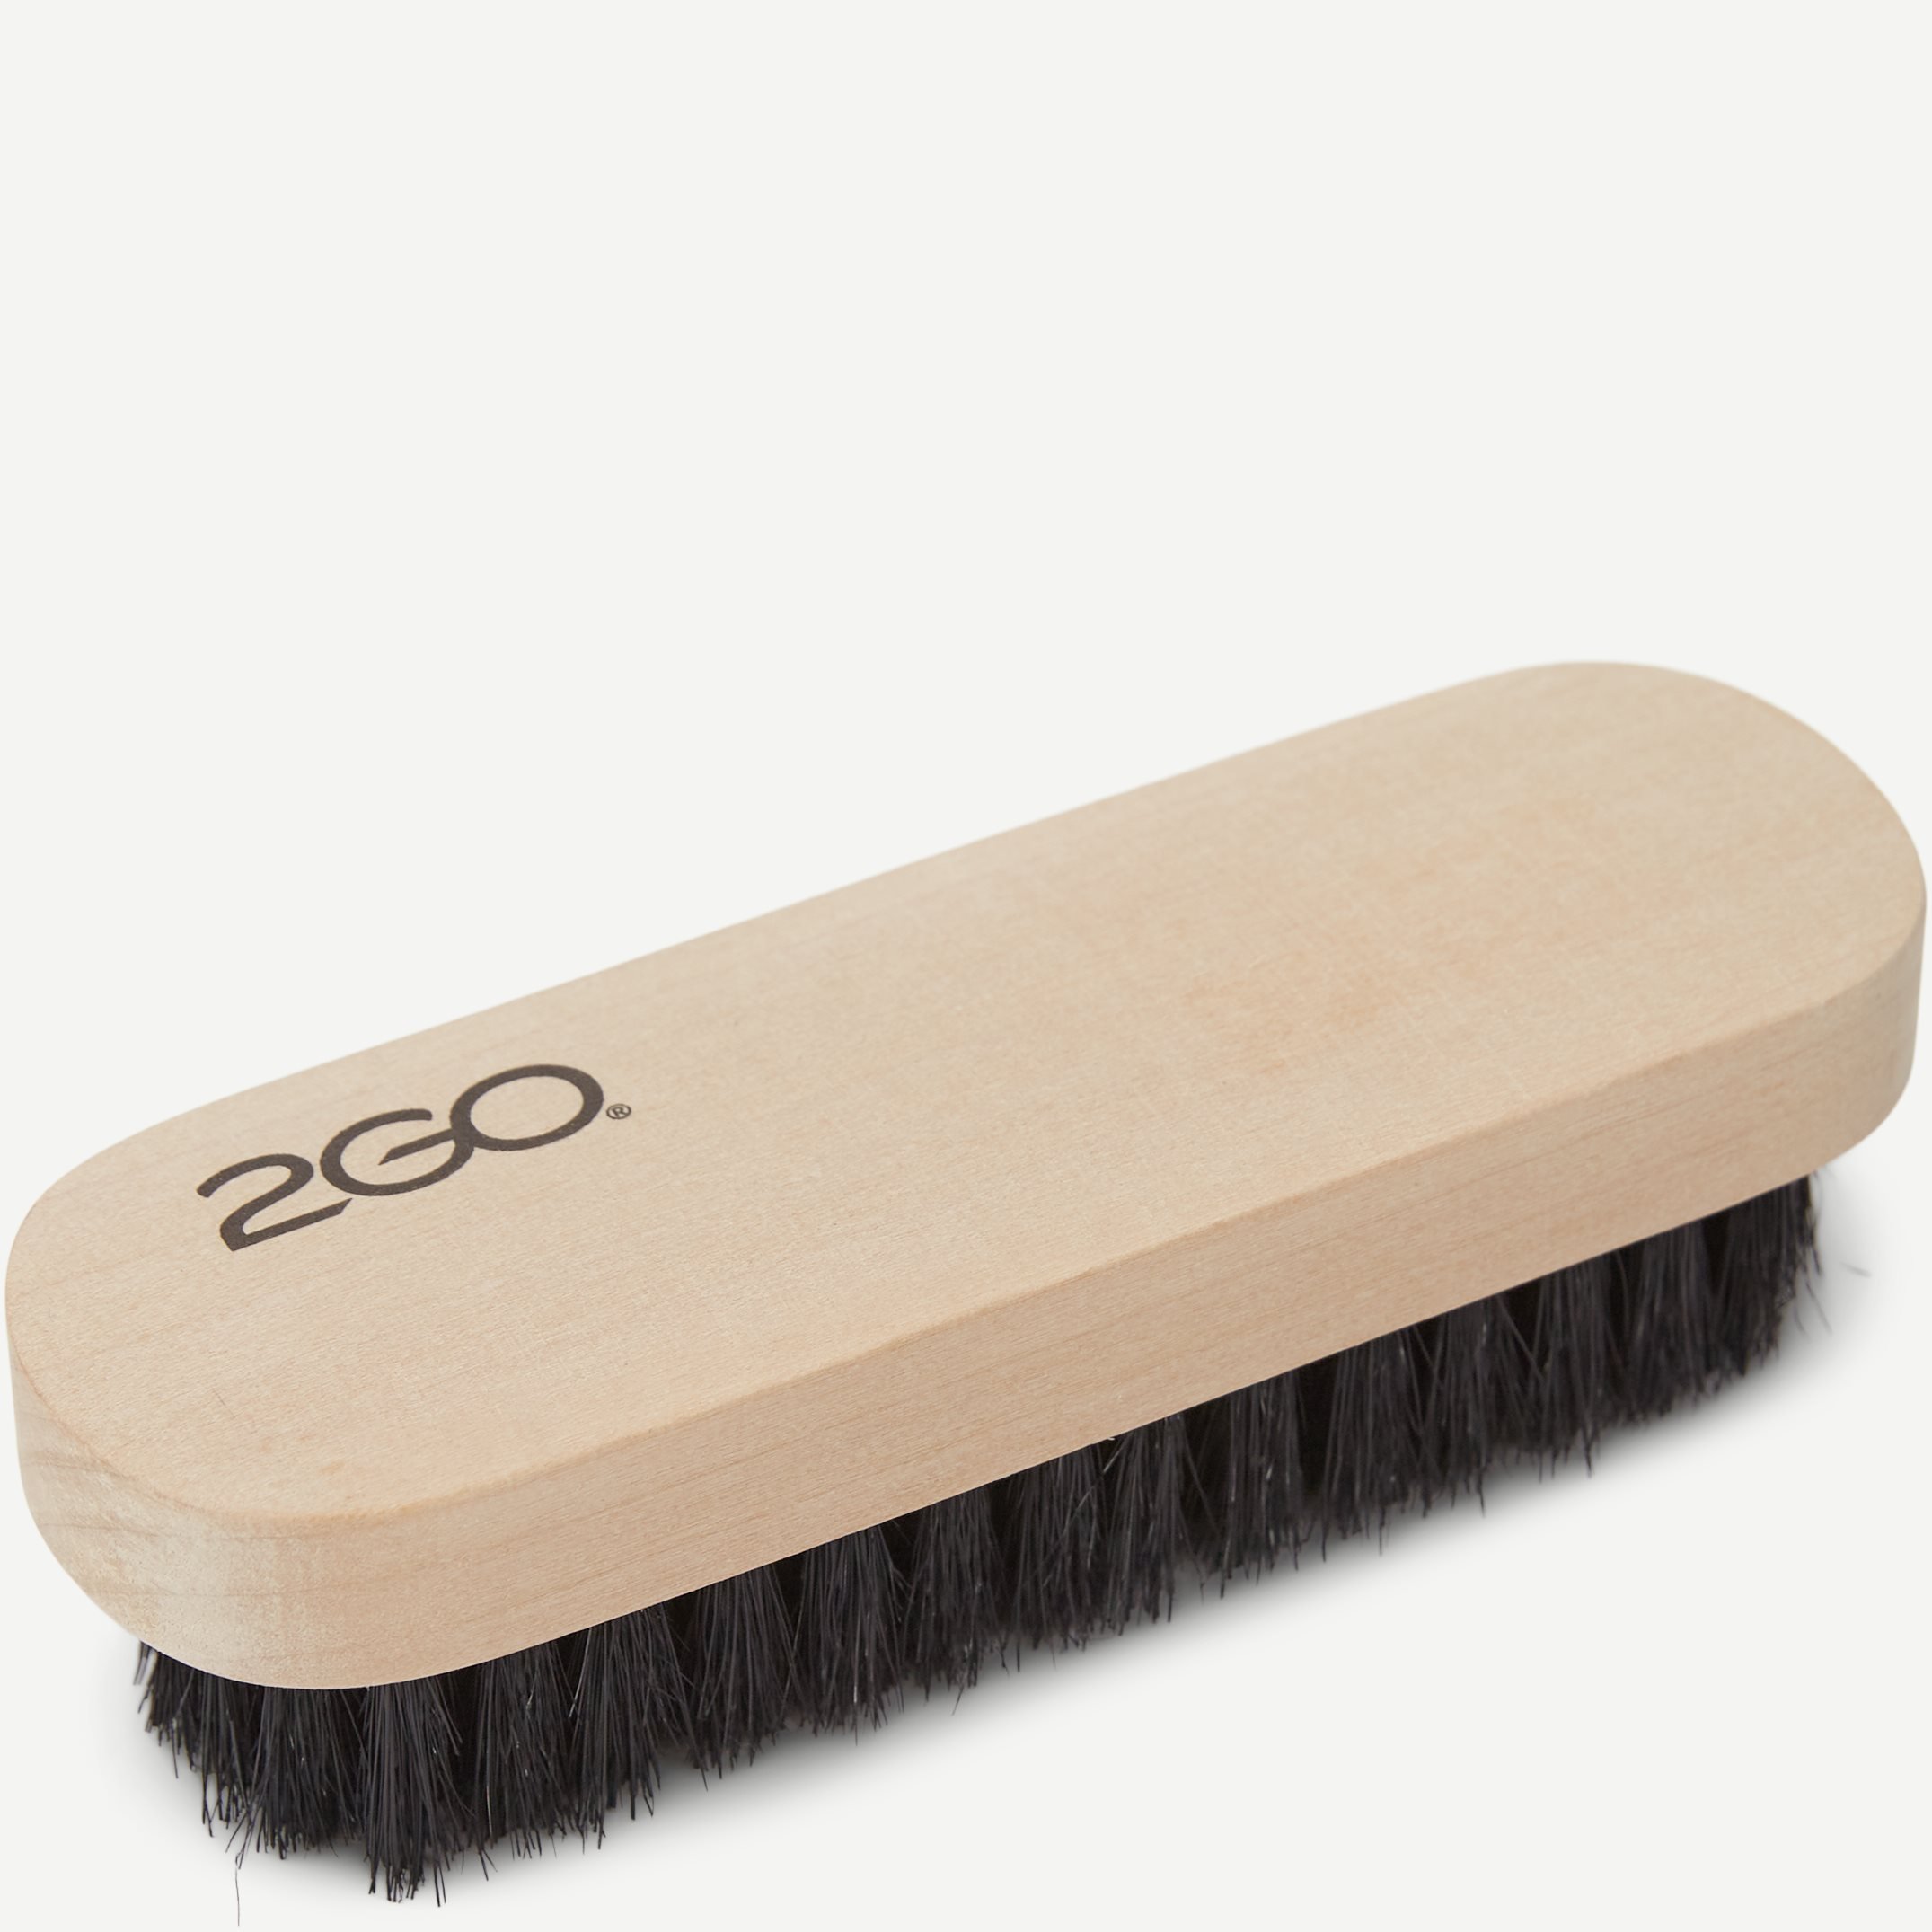 Woly Protector Accessoarer SHOE BRUSH SMALL Vit